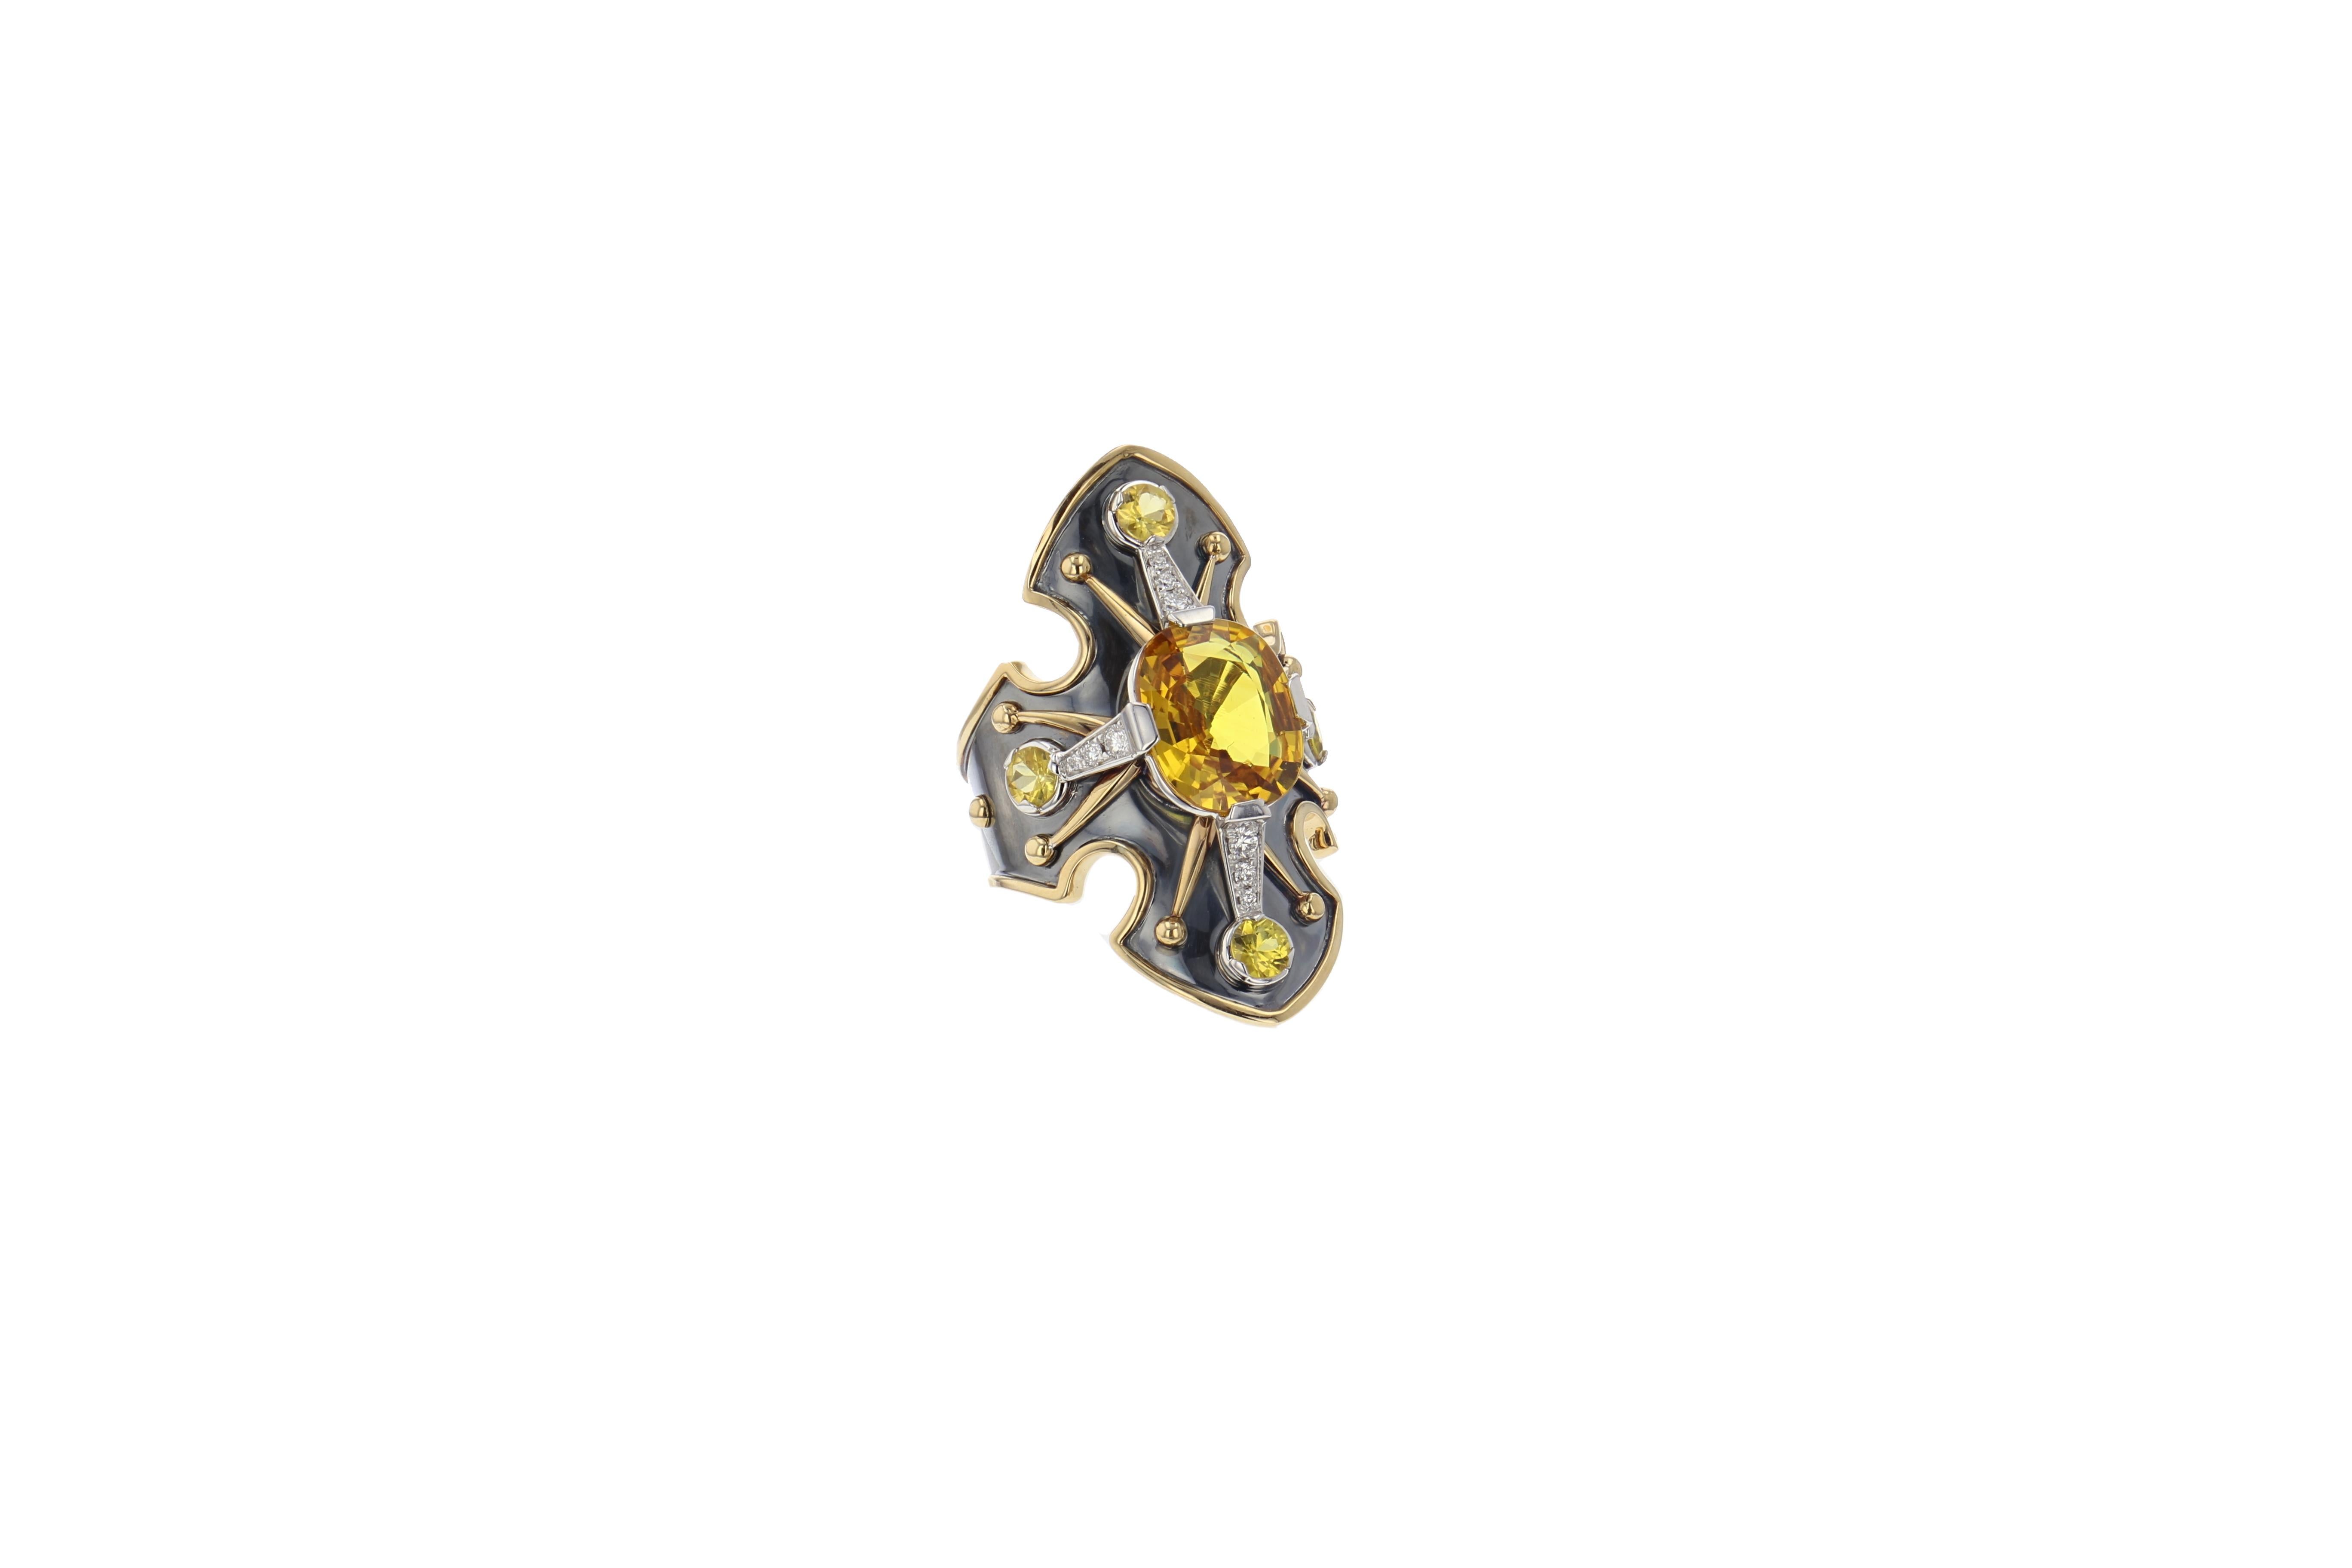 18K Yellow Gold and Distressed Silver Statement Shield Ring.
Encrusted with Diamonds (0.23 cts) and 5 yellow sapphires including a central one of 4.5 cts